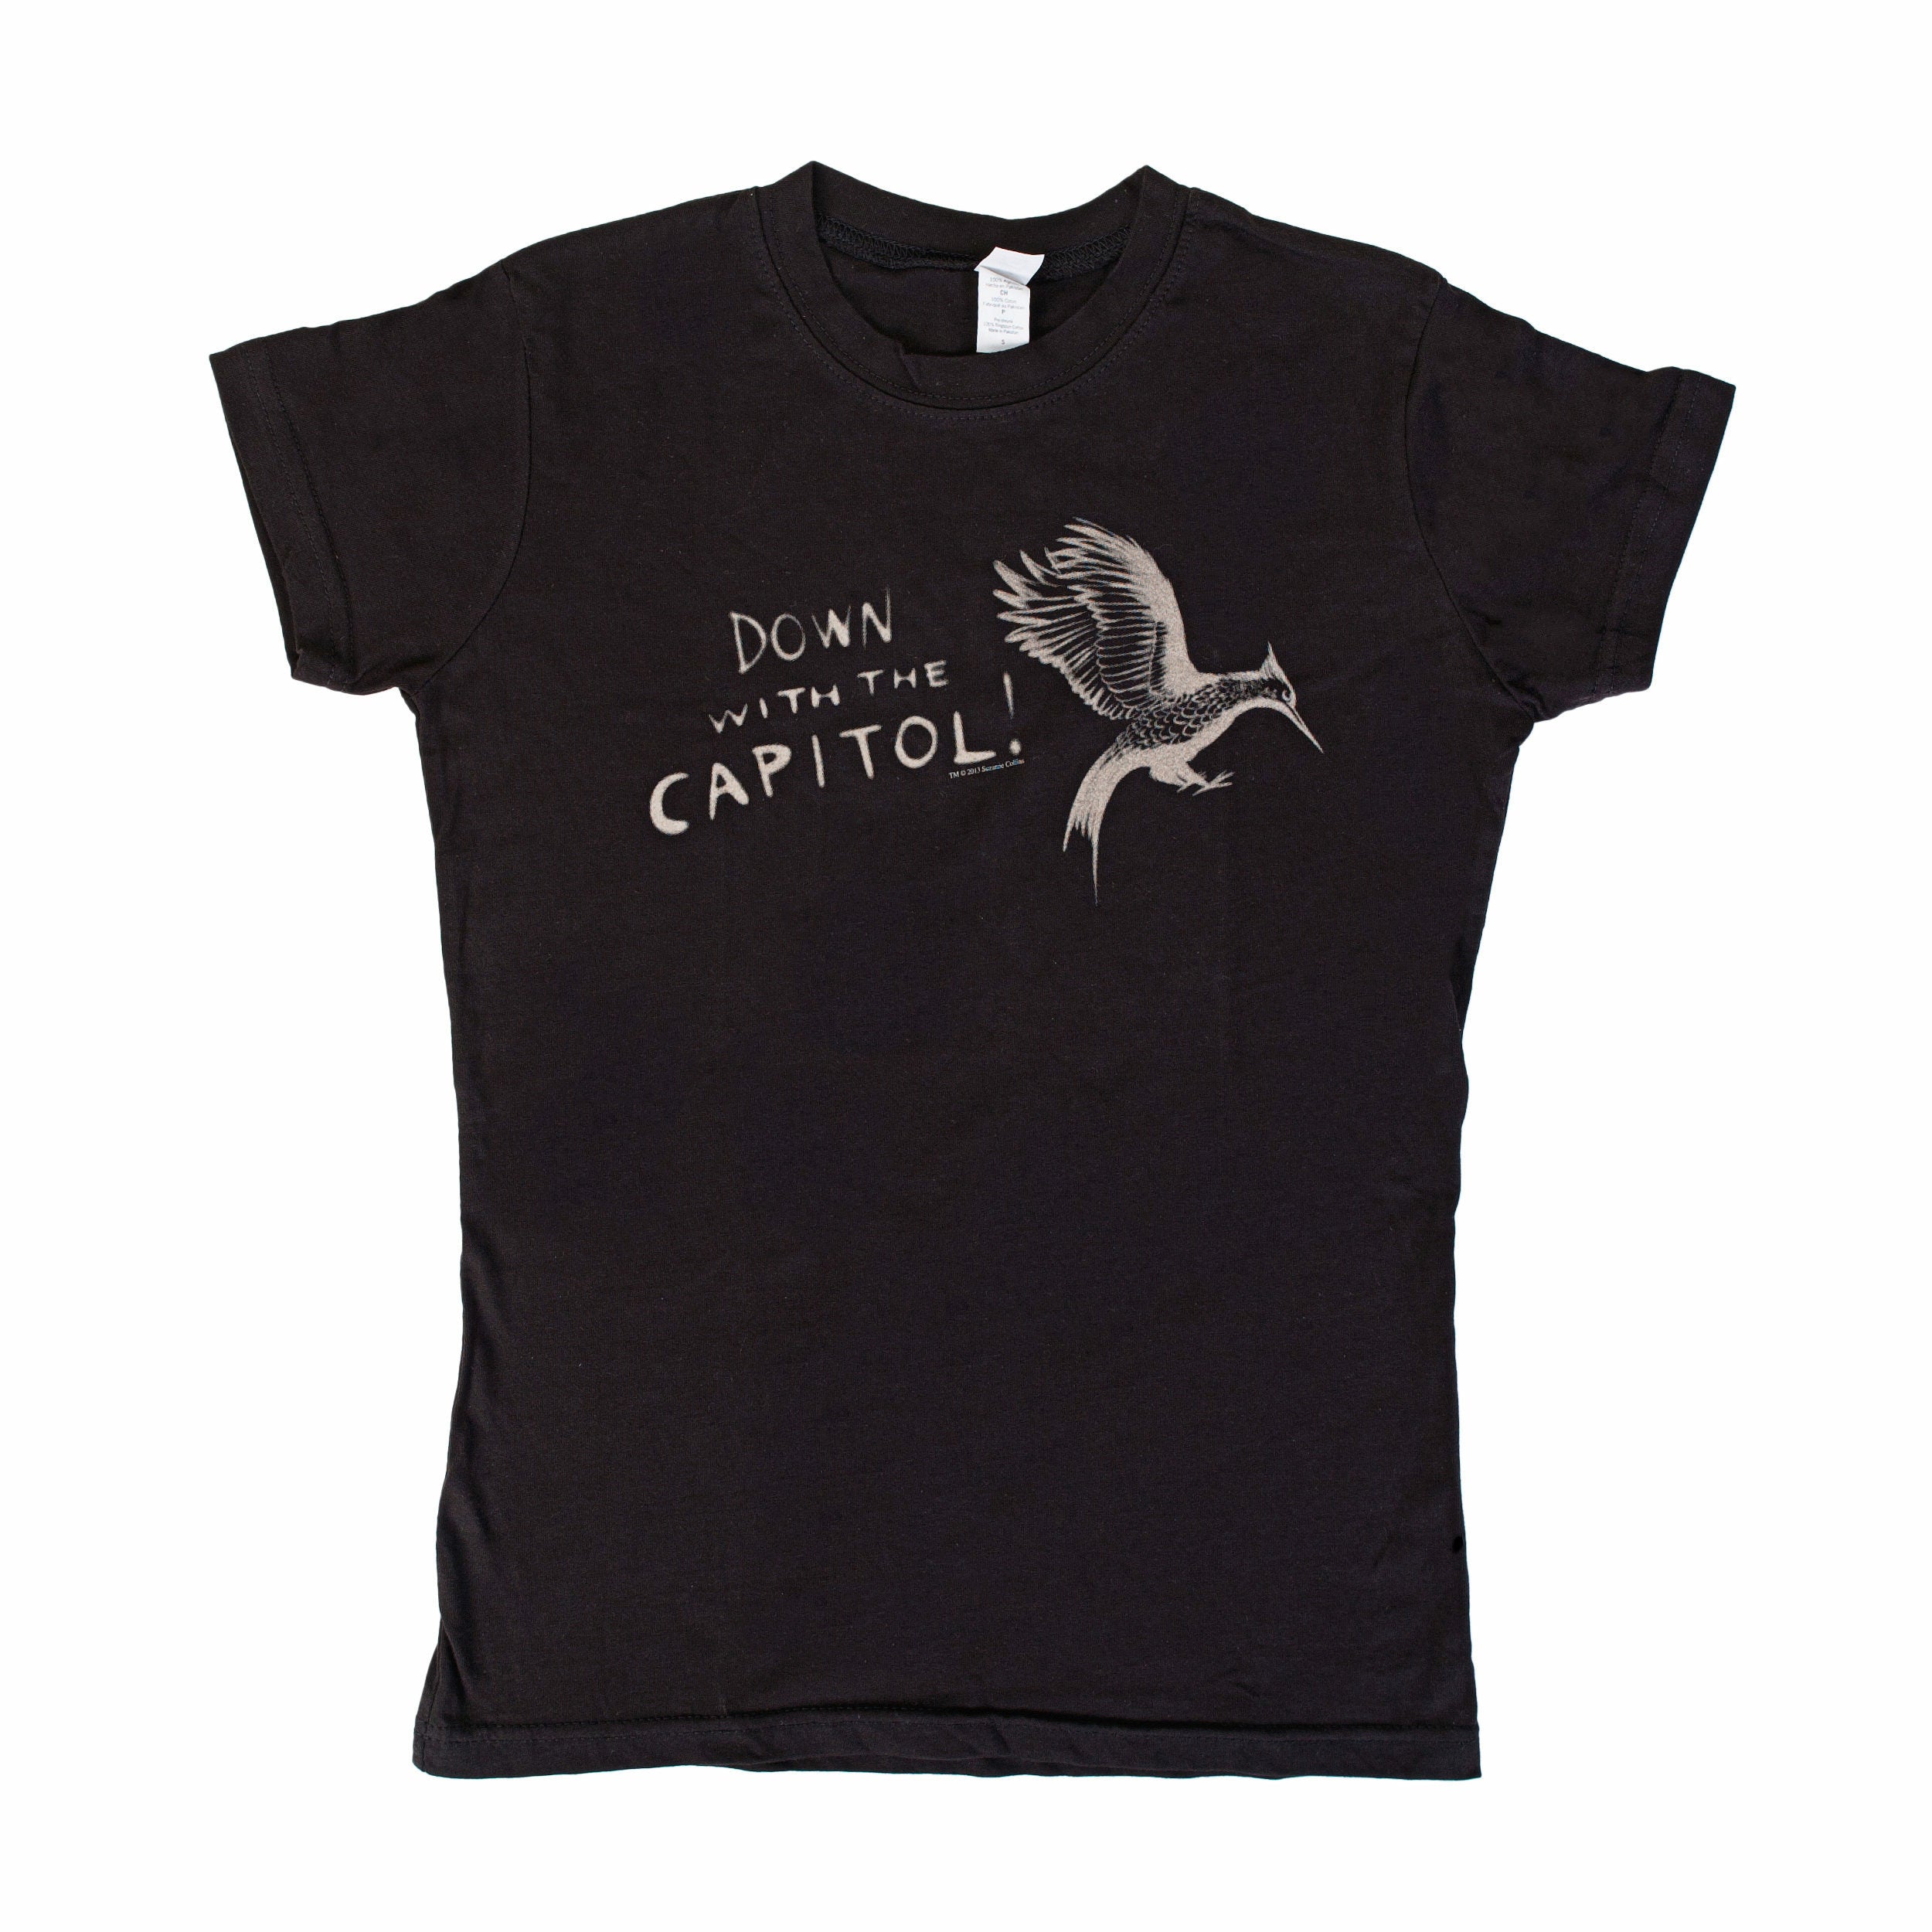 The Hunger Games 2: Catching Fire Down With Capitol Juniors Black T-Shirt